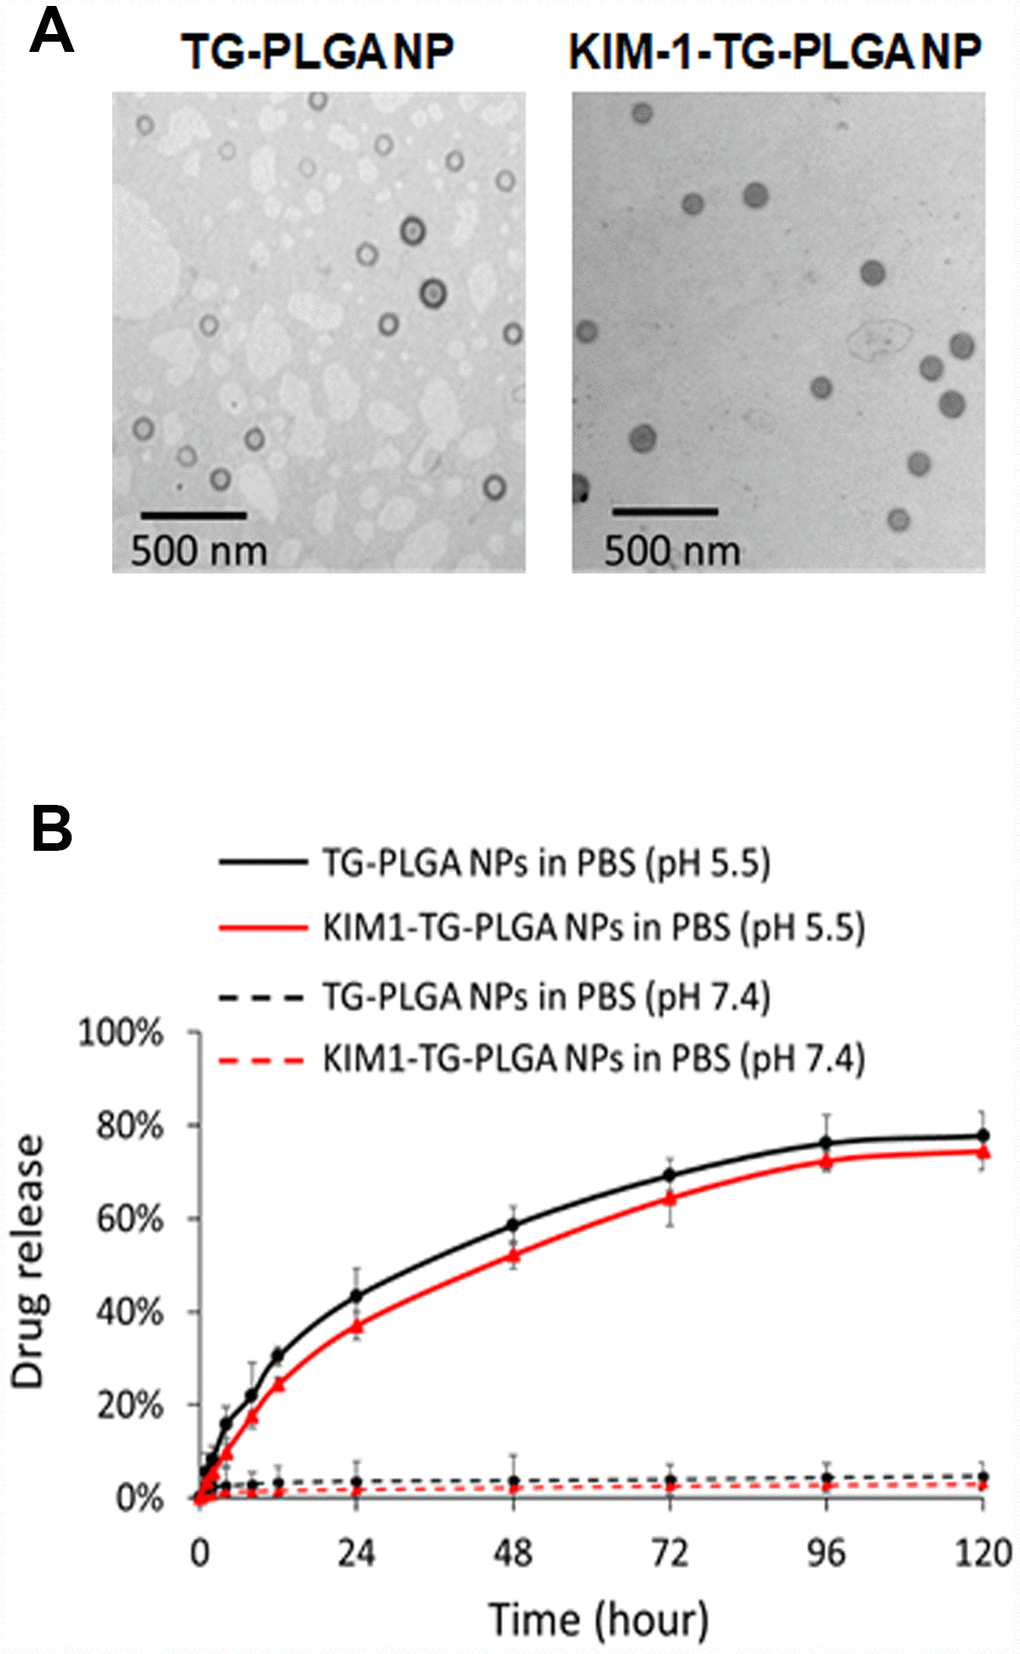 The morphology and TG release profile of TG NPs and KIM-1-TG NPs. (A) TEM images of the TG NPs and KIM-1-TG NPs. (B) In vitro TG release profile of the TG NPs and KIM-1-TG NPs incubated at 37°C in PBS (pH 5.5 and 7.4).